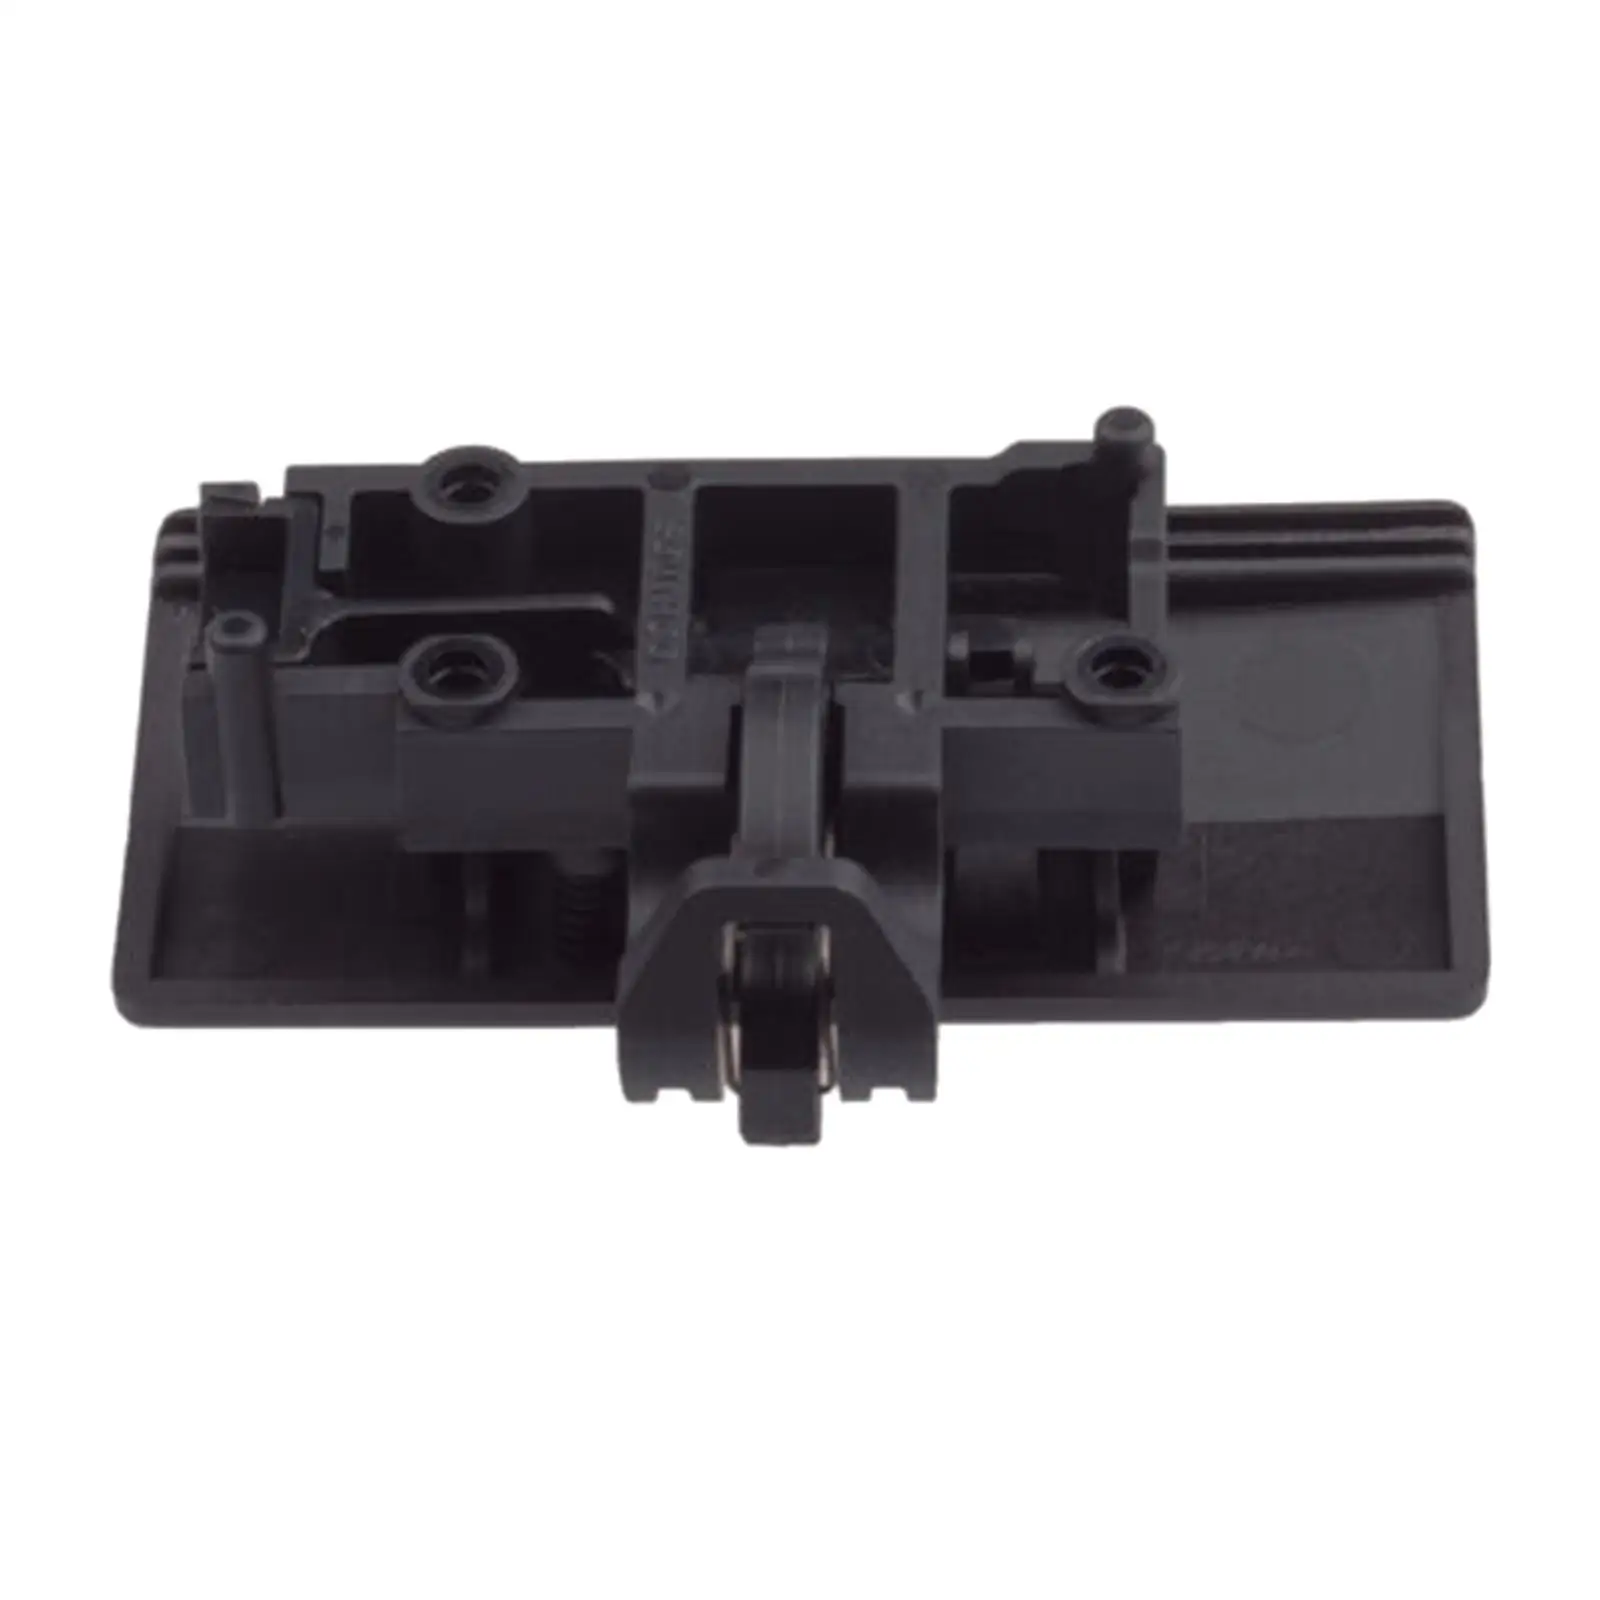 Glove Box Door Latch Lock Practical Accessory Black for Ford F150 F250